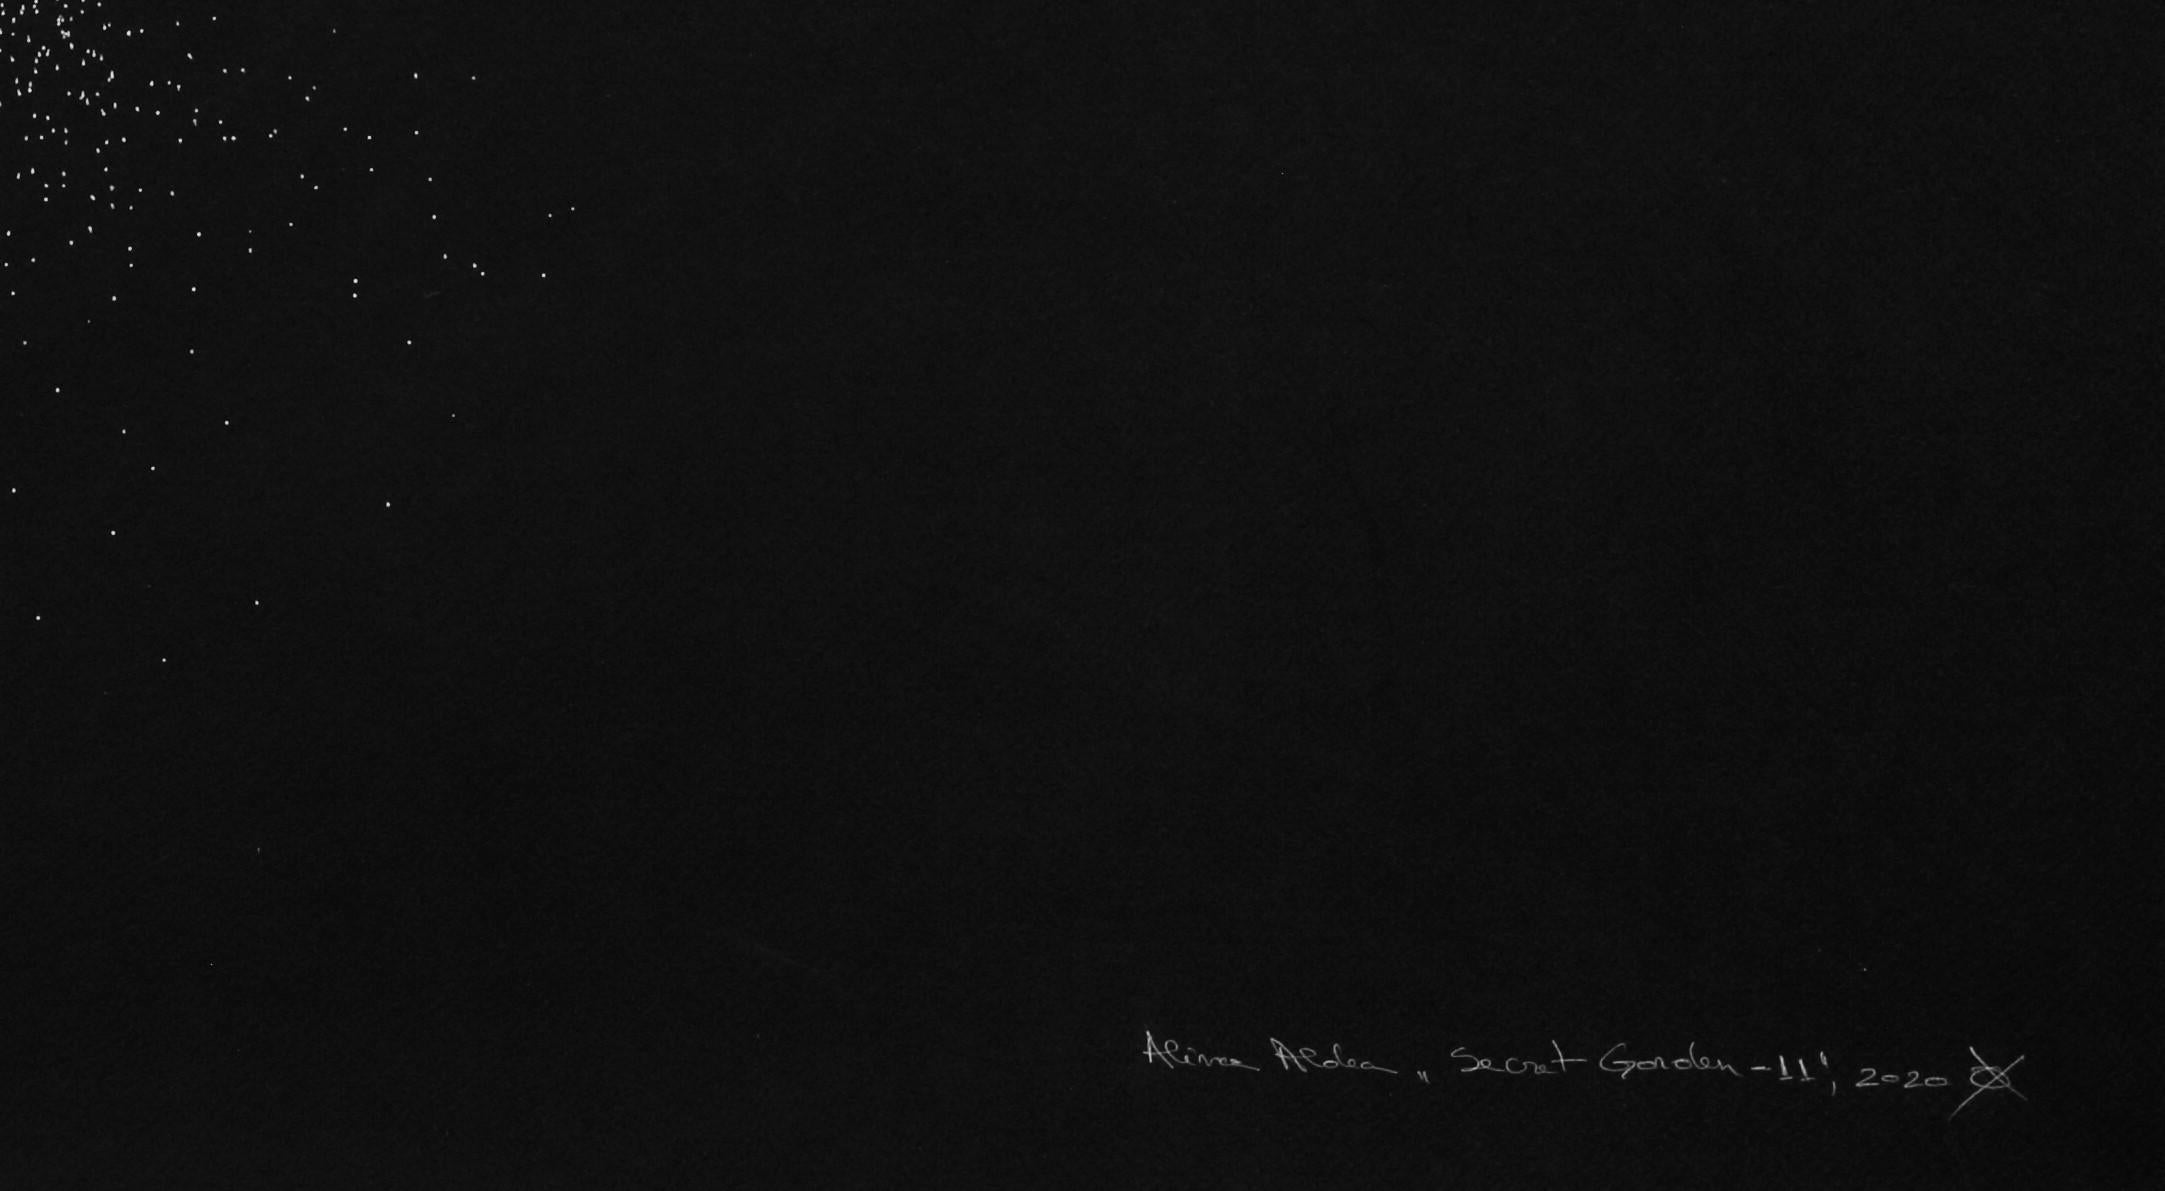 Secret Garden 11, 2020
white ink on black cardboard
27 9/16 H x 39 3/8 W in.
70 H x 100 W cm

The drawings signed by Alina Aldea show the meticulousness and perfection of microscopic observation. Alina Aldea's creation is driven by the idea of